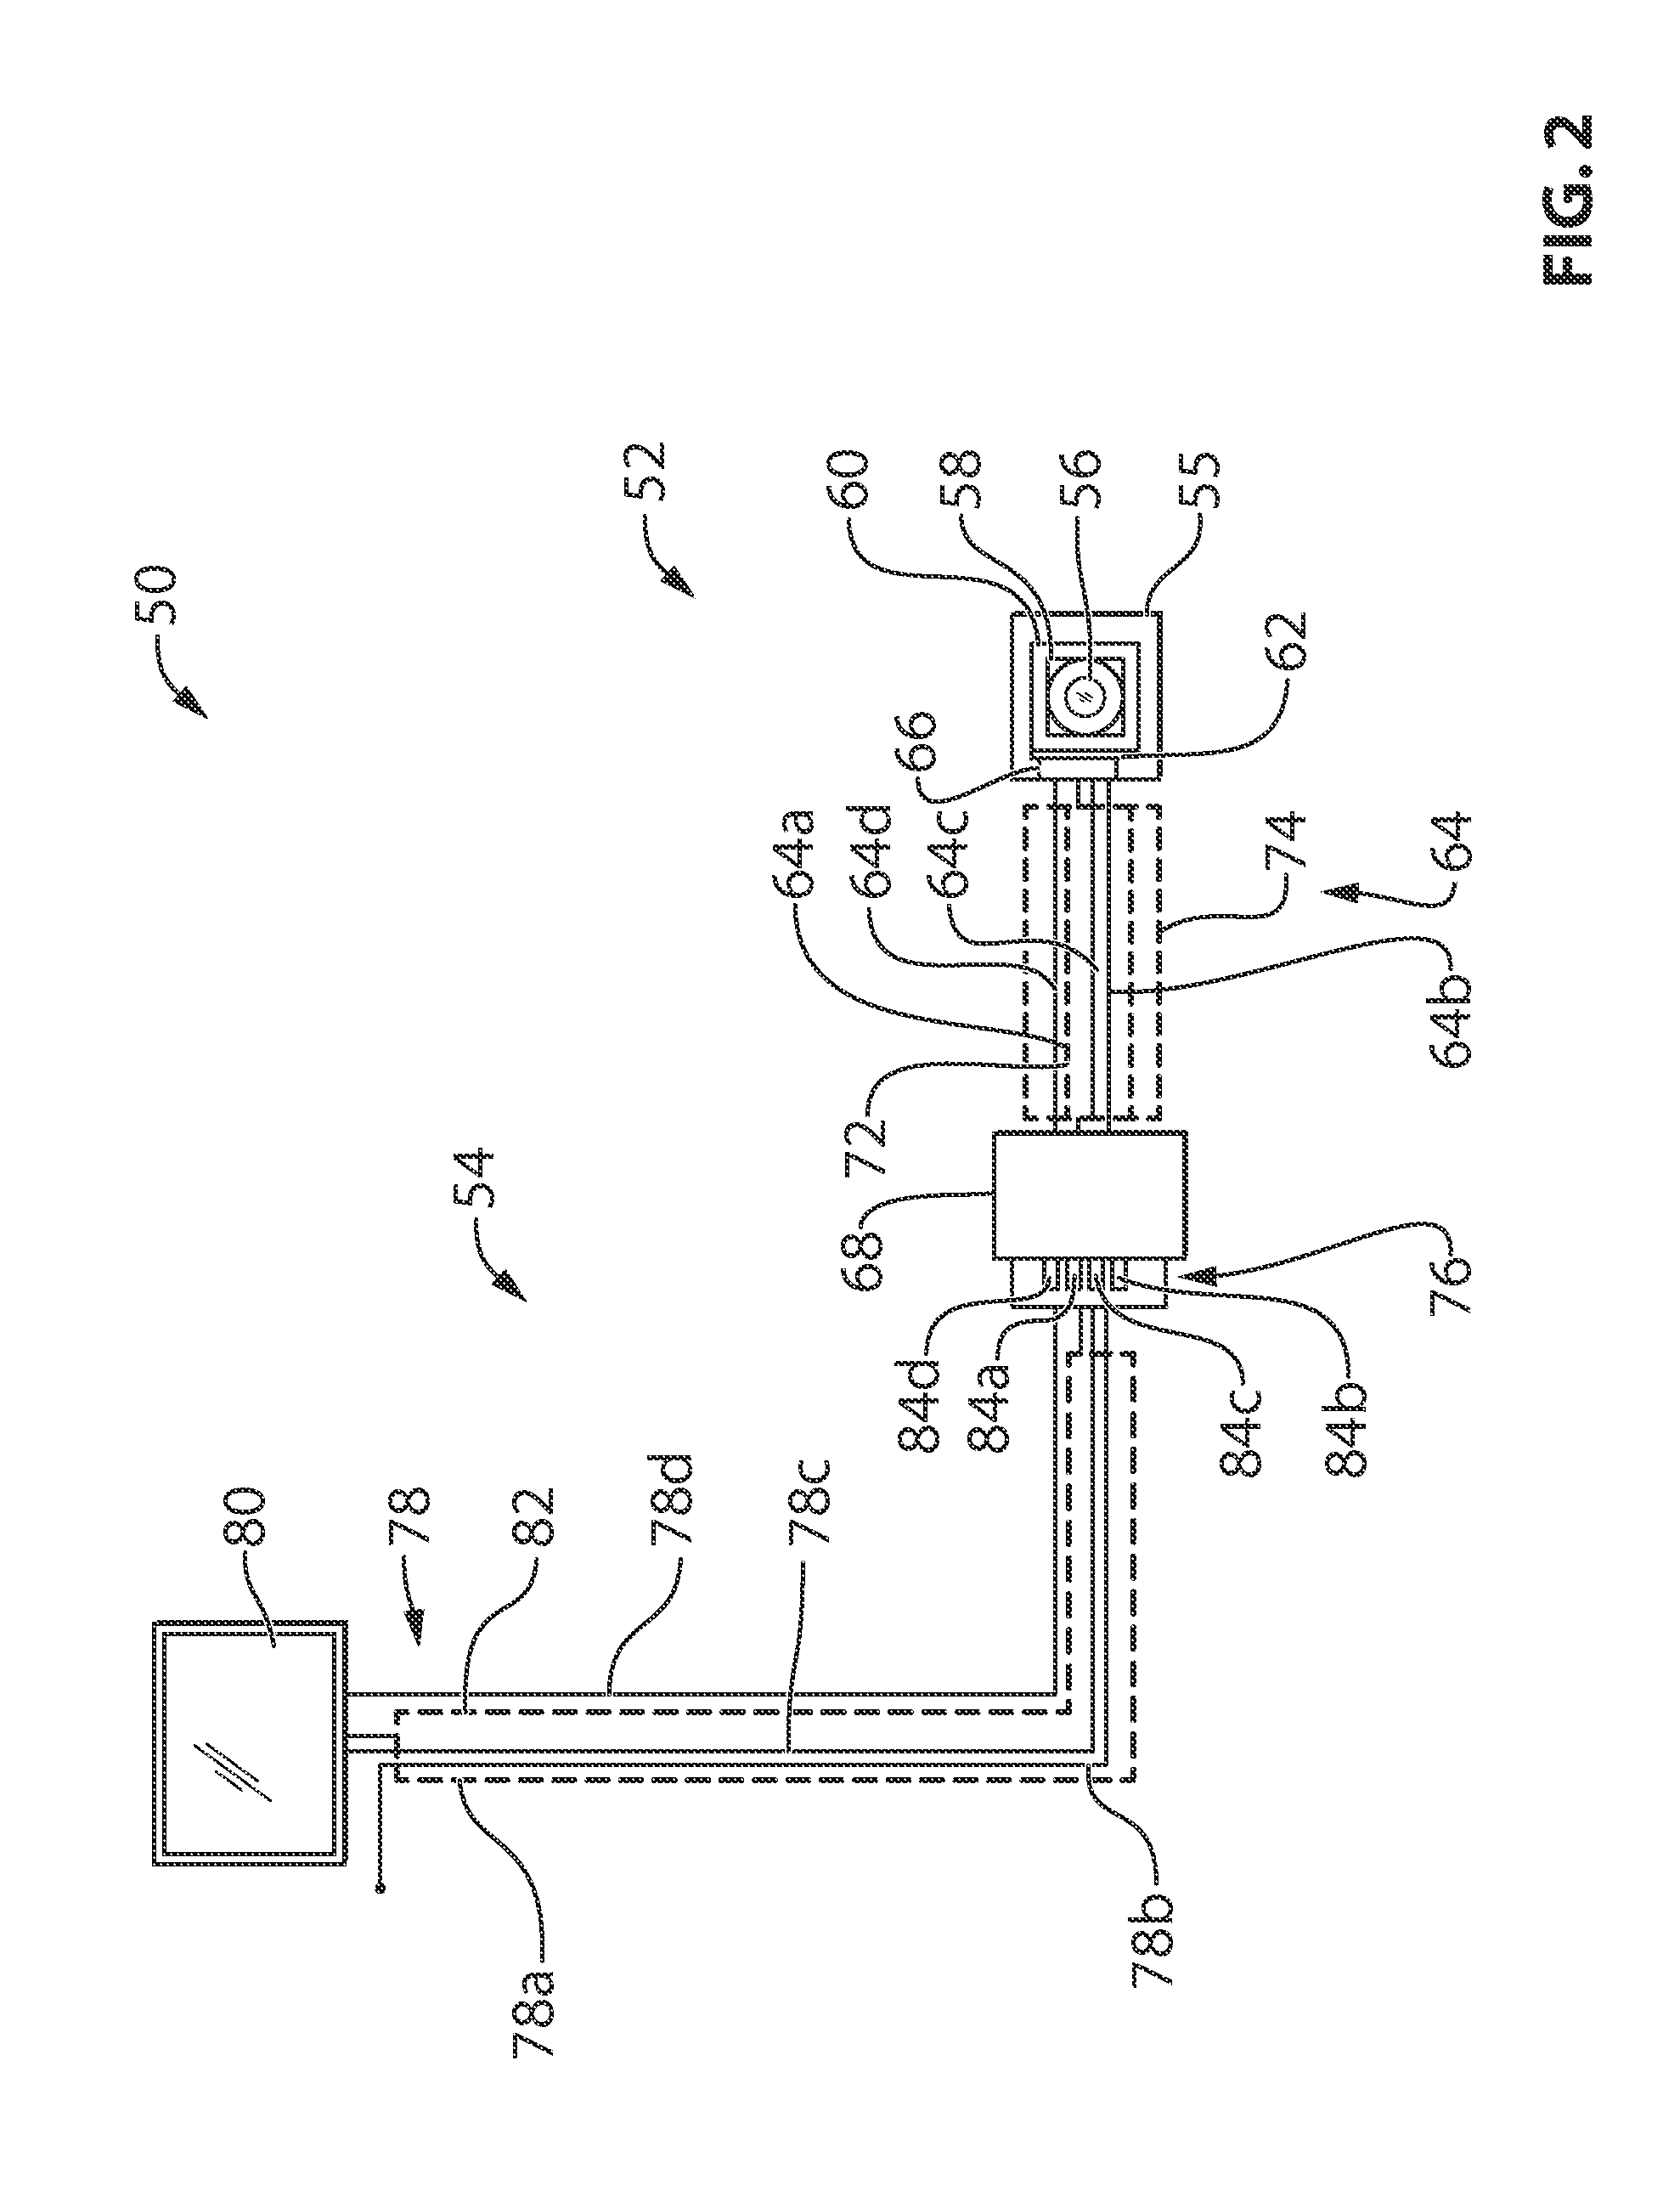 Vehicular camera system with reduced number of pins and conduits